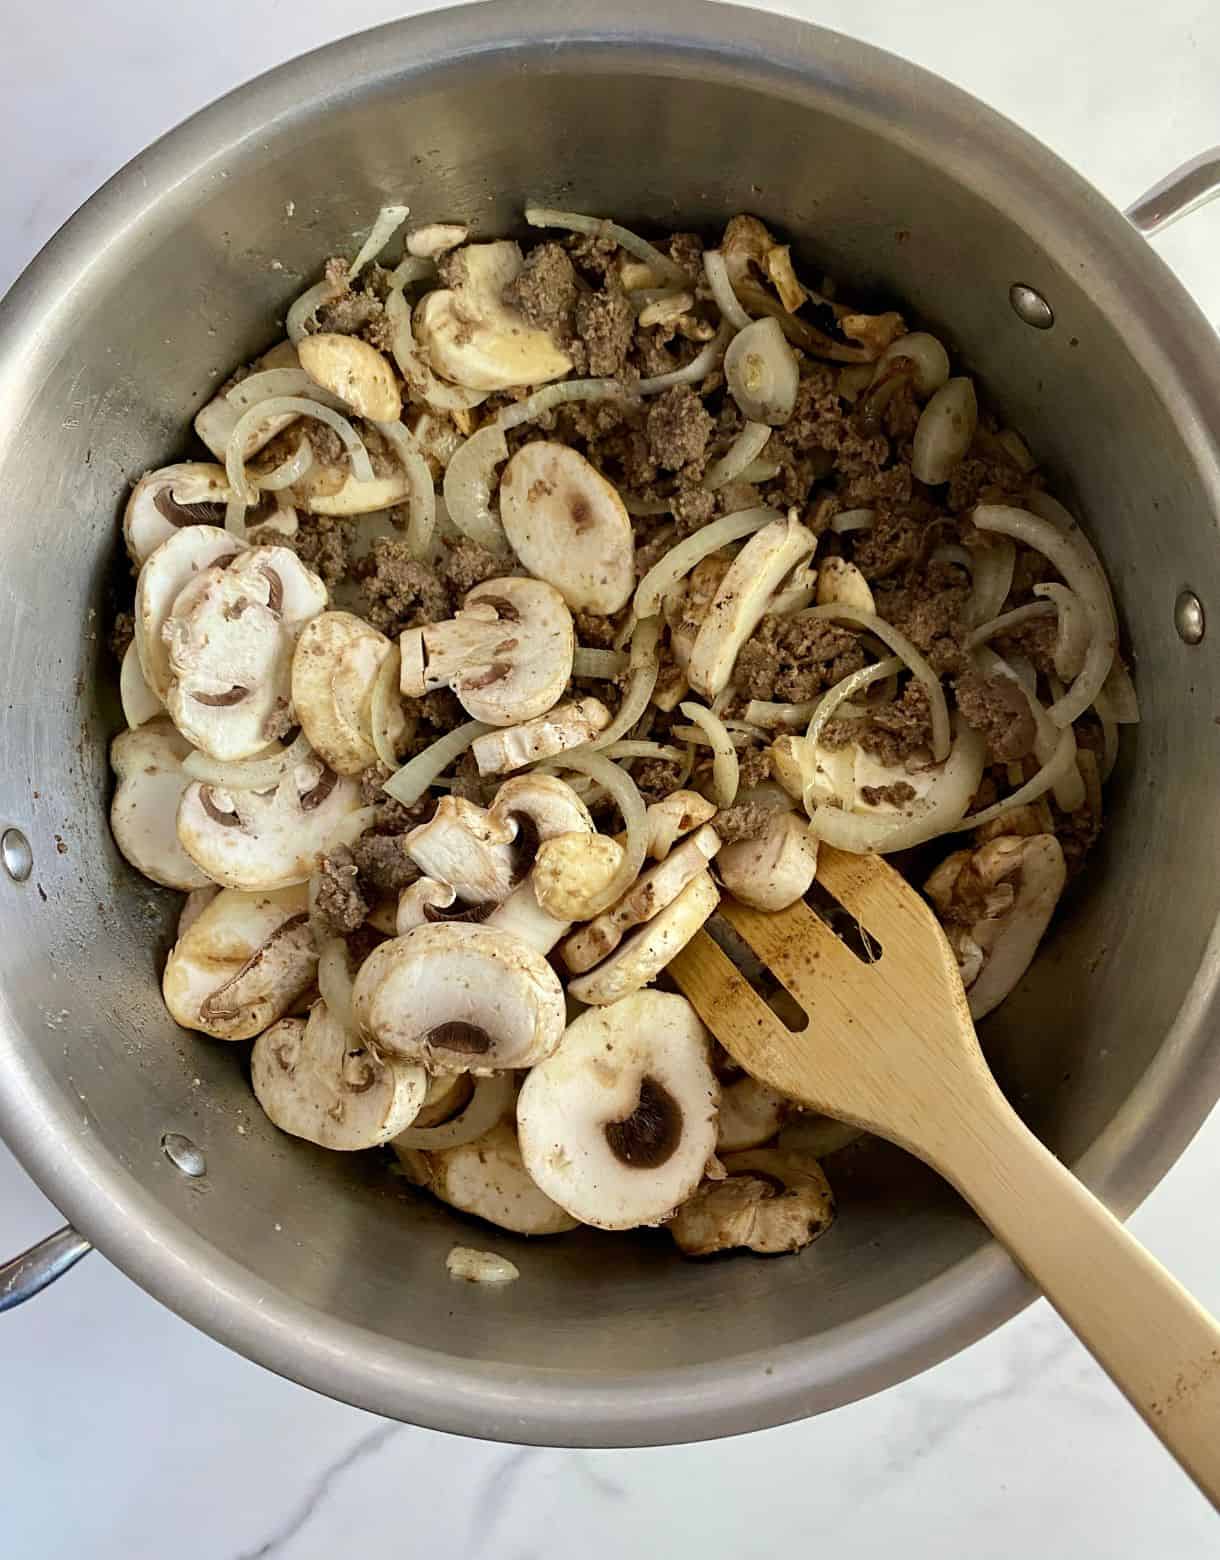 A pot of sauteeing turkey sausage, mushrooms and onions.